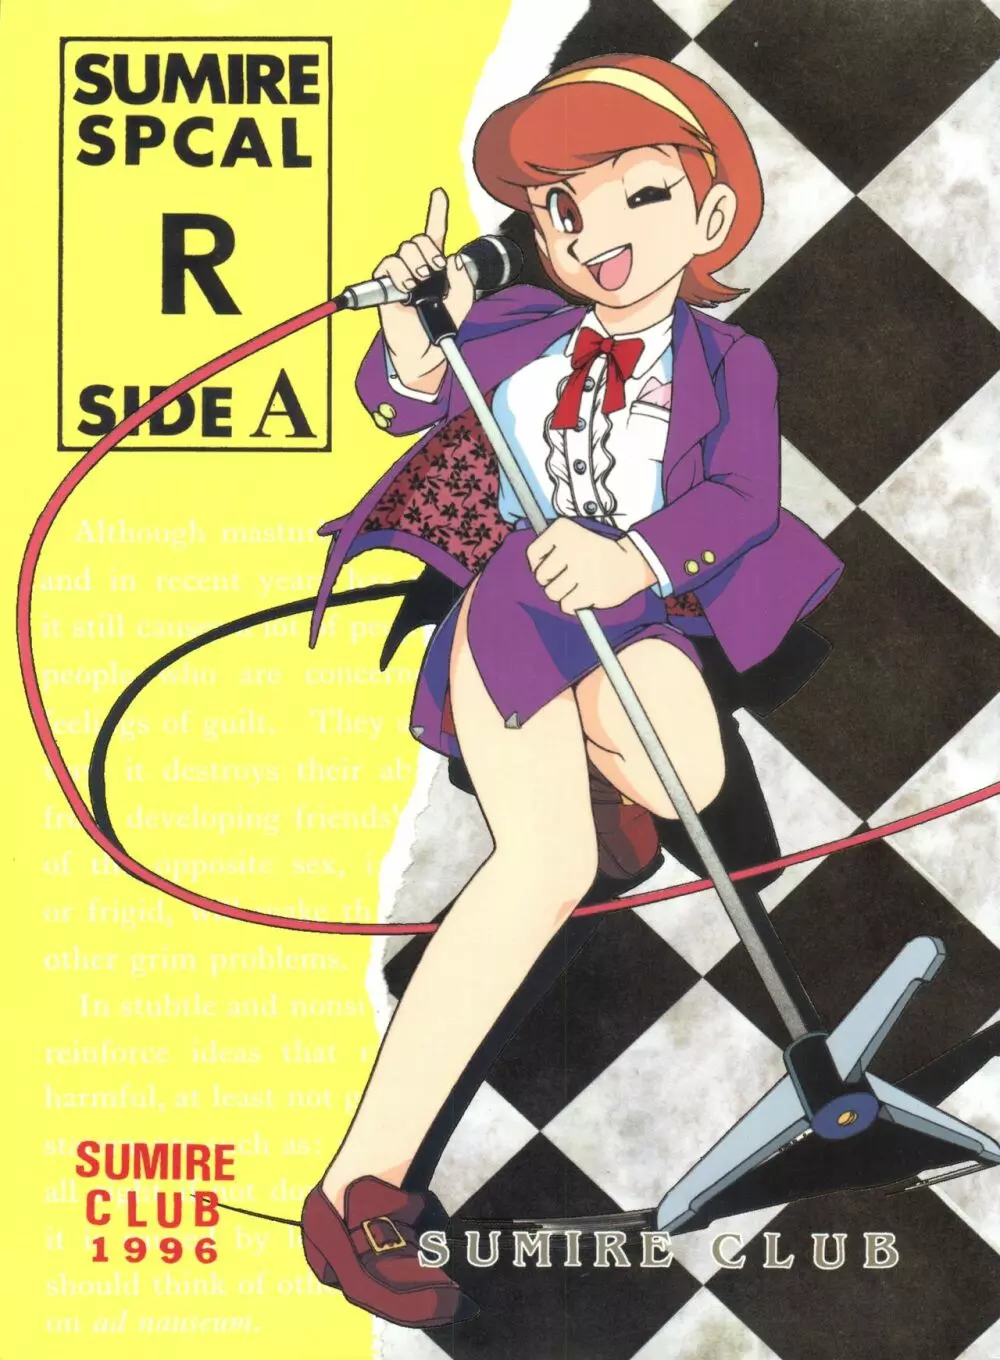 SUMIRE SPCAL R SIDE A 1ページ